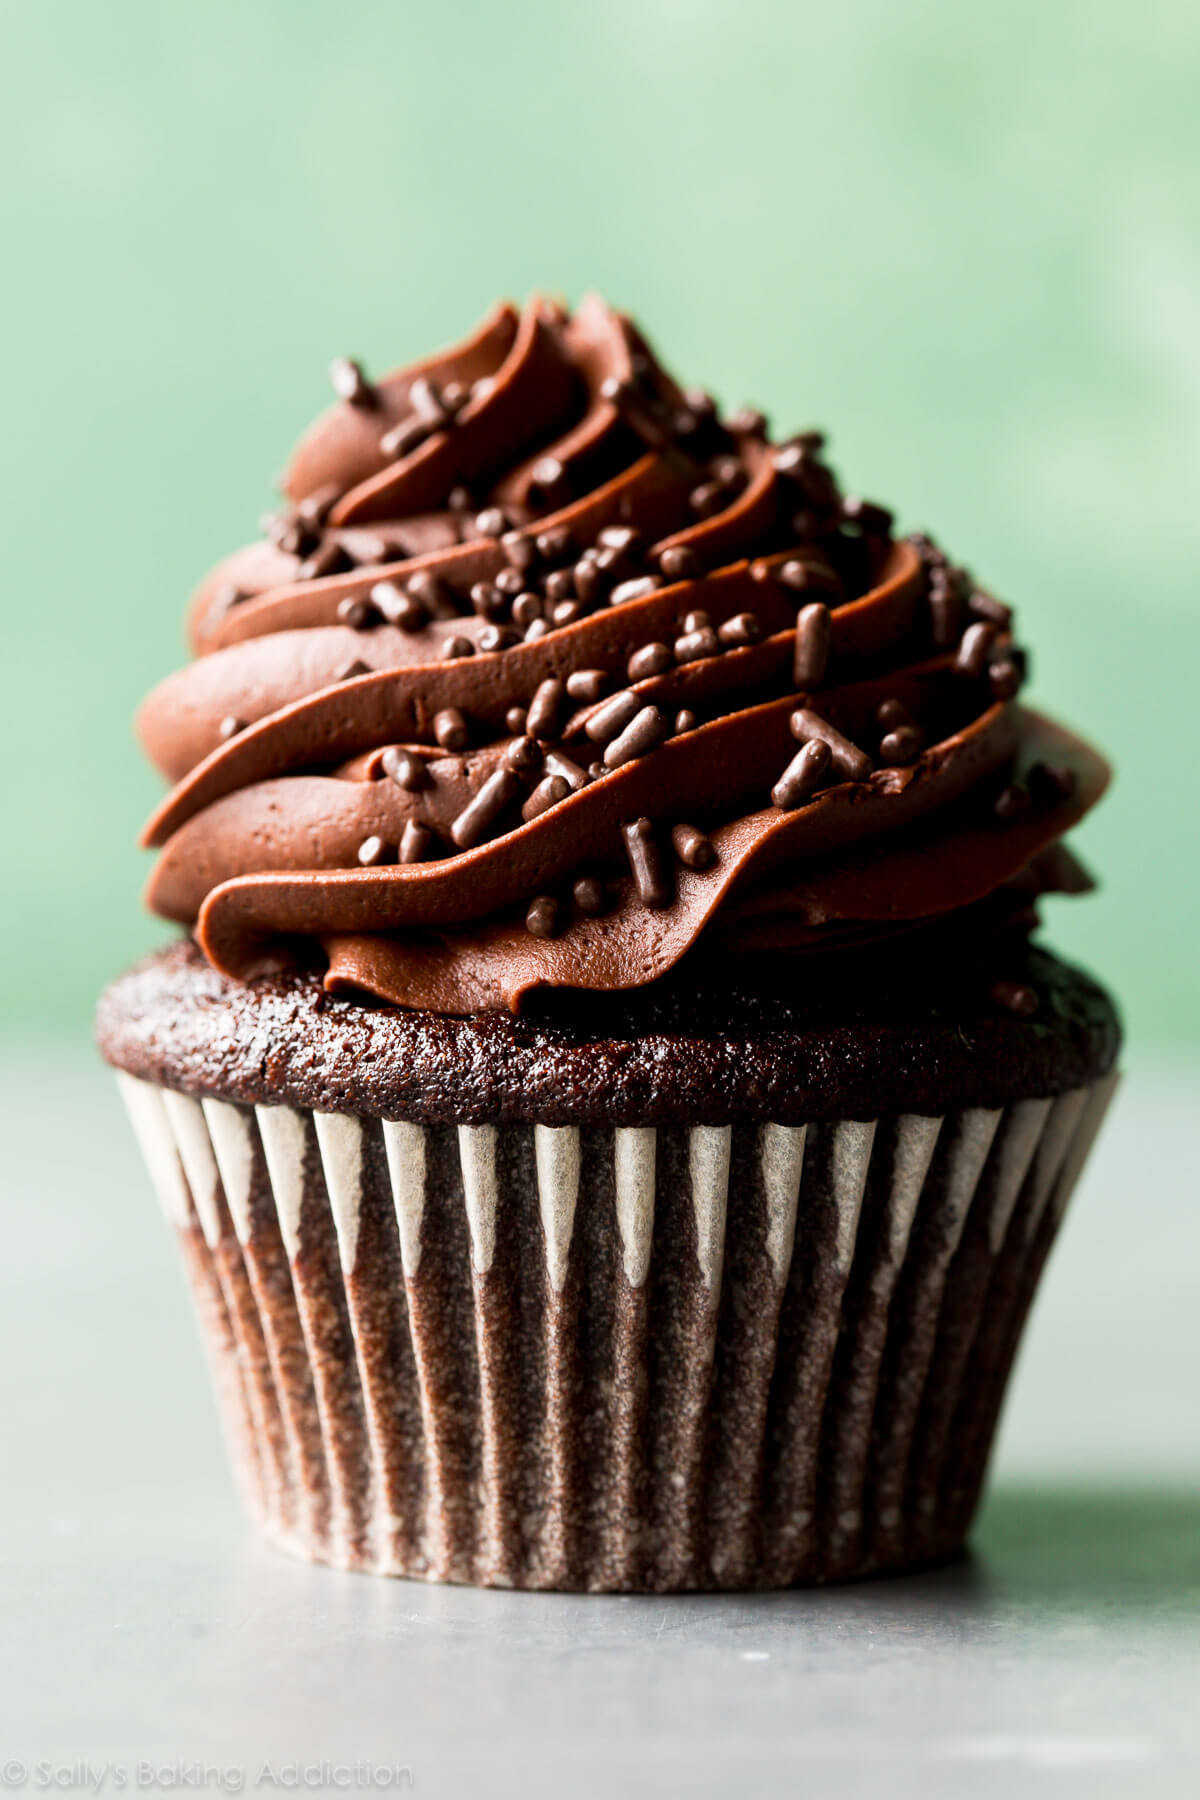 Best Chocolate Cupcakes Elegant Classic Chocolate Cupcakes with Vanilla Frosting Sallys